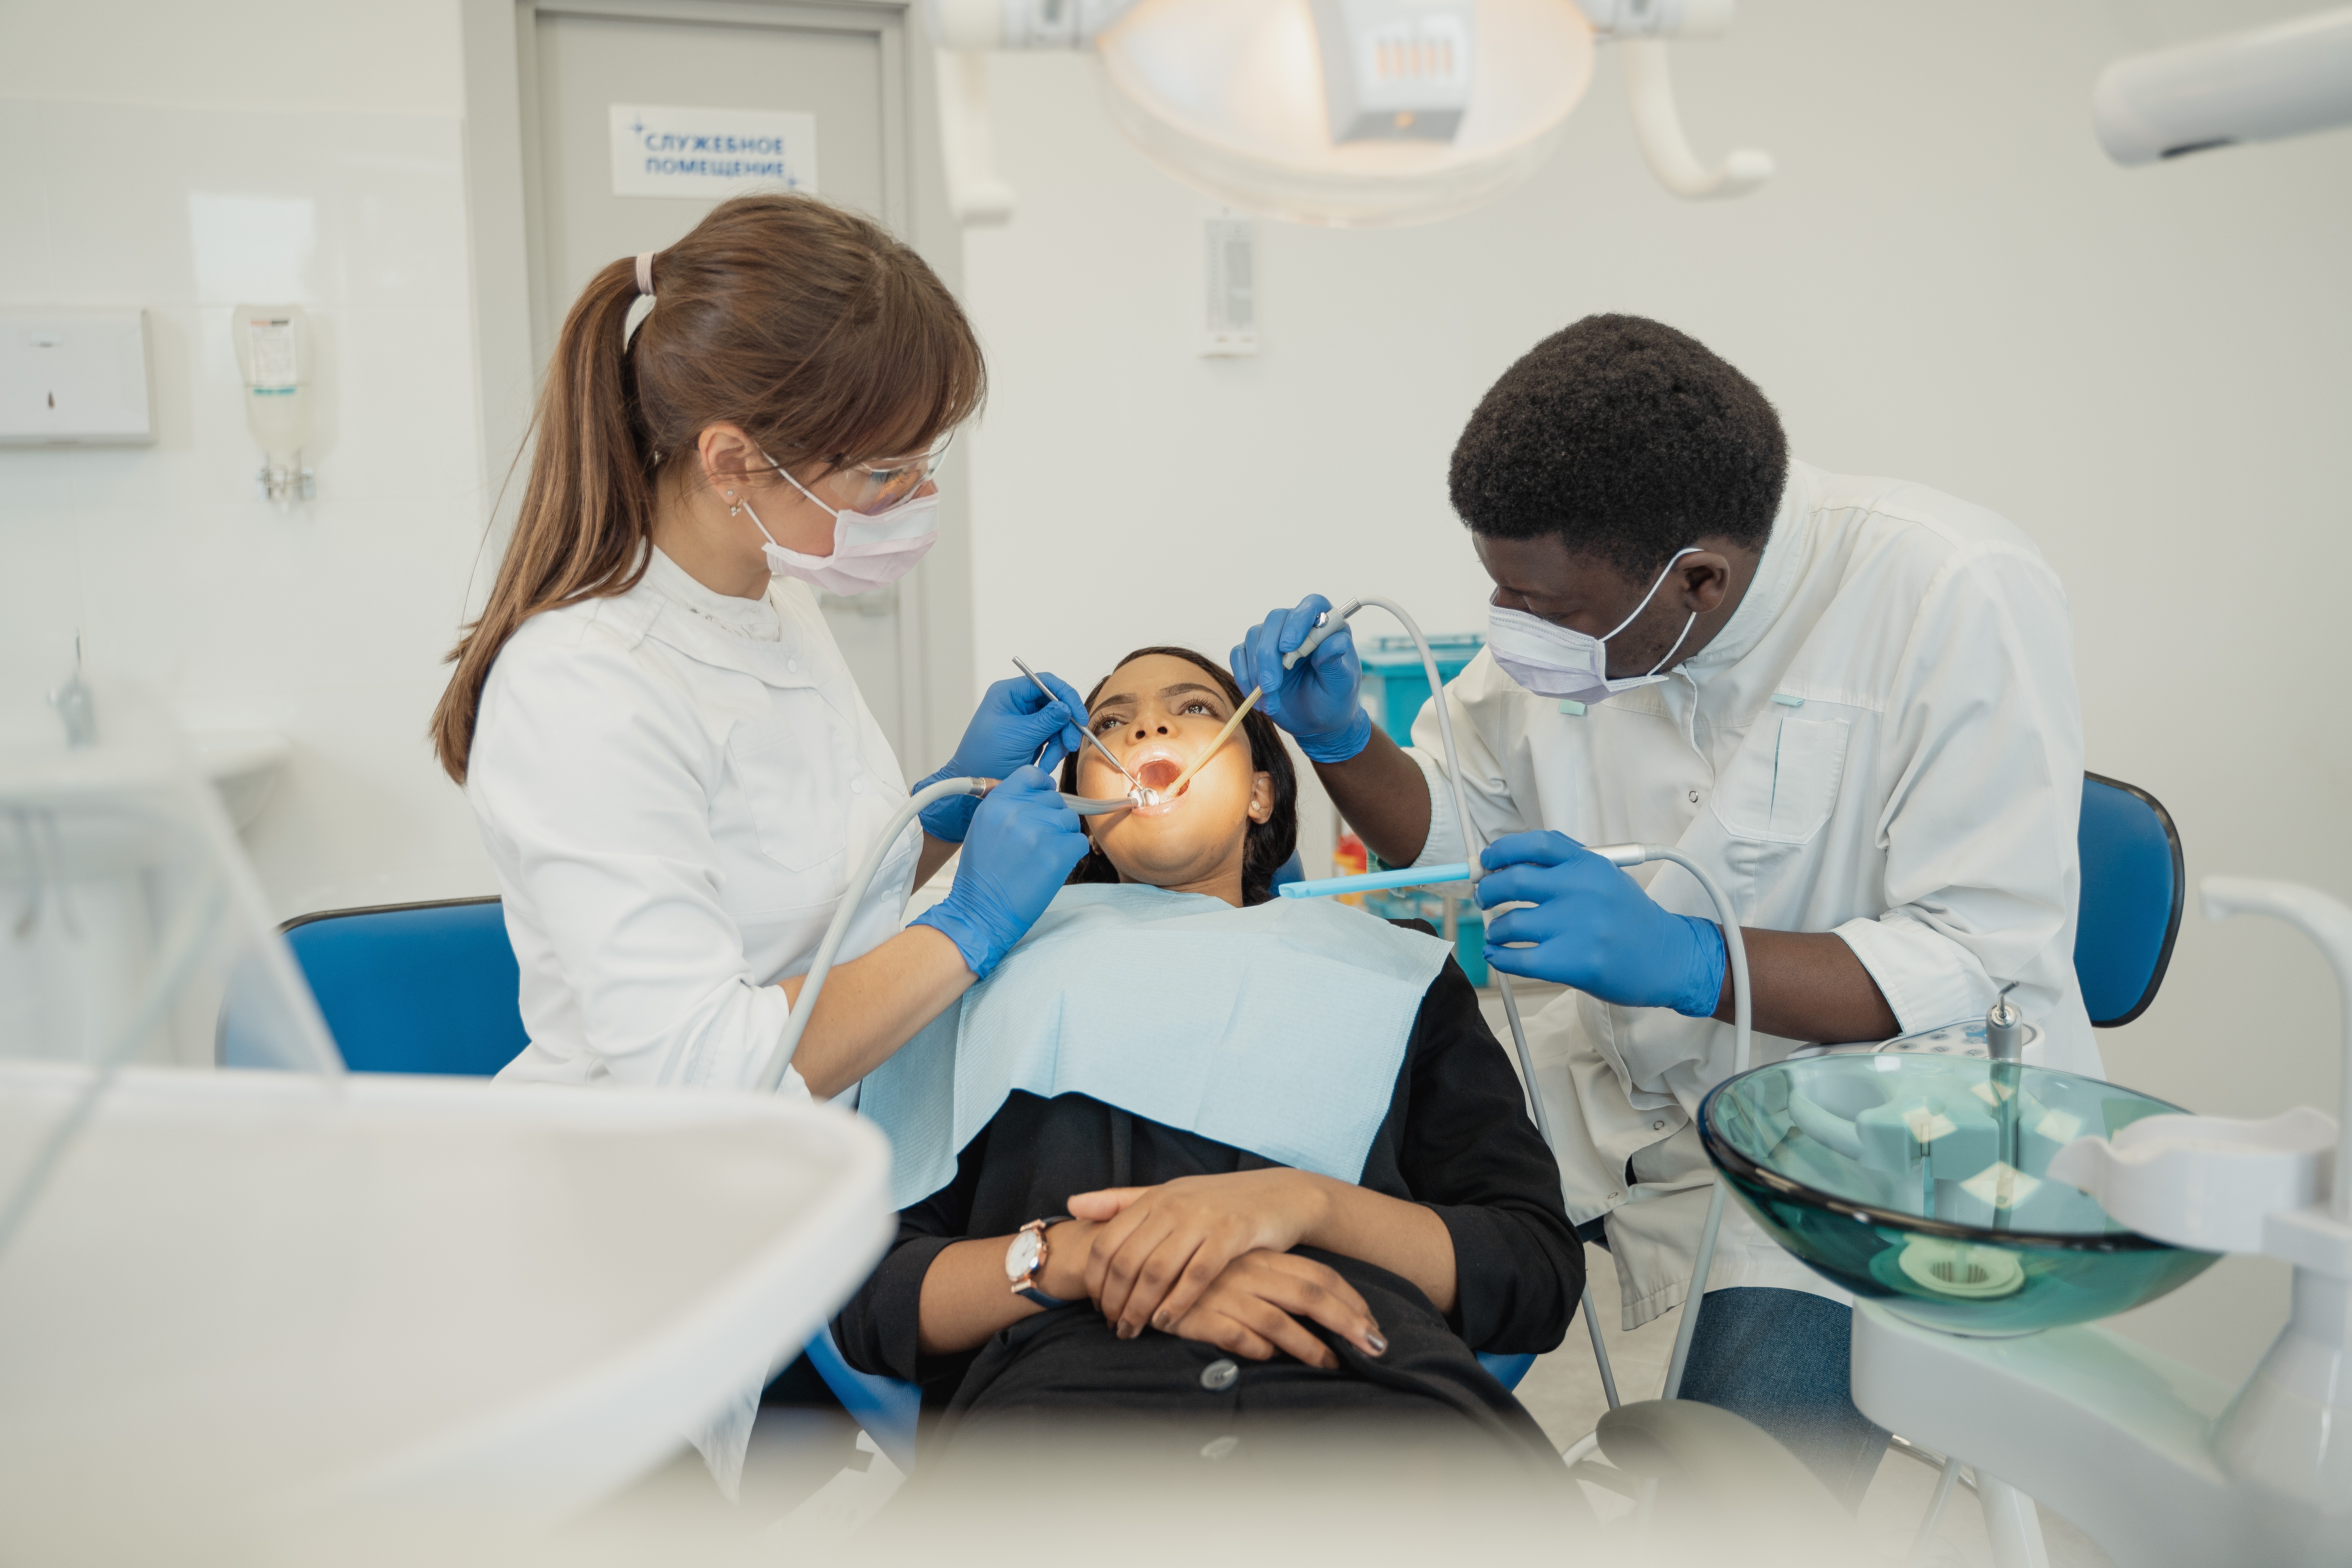 A Dentist Working on a Patient with an Assistant